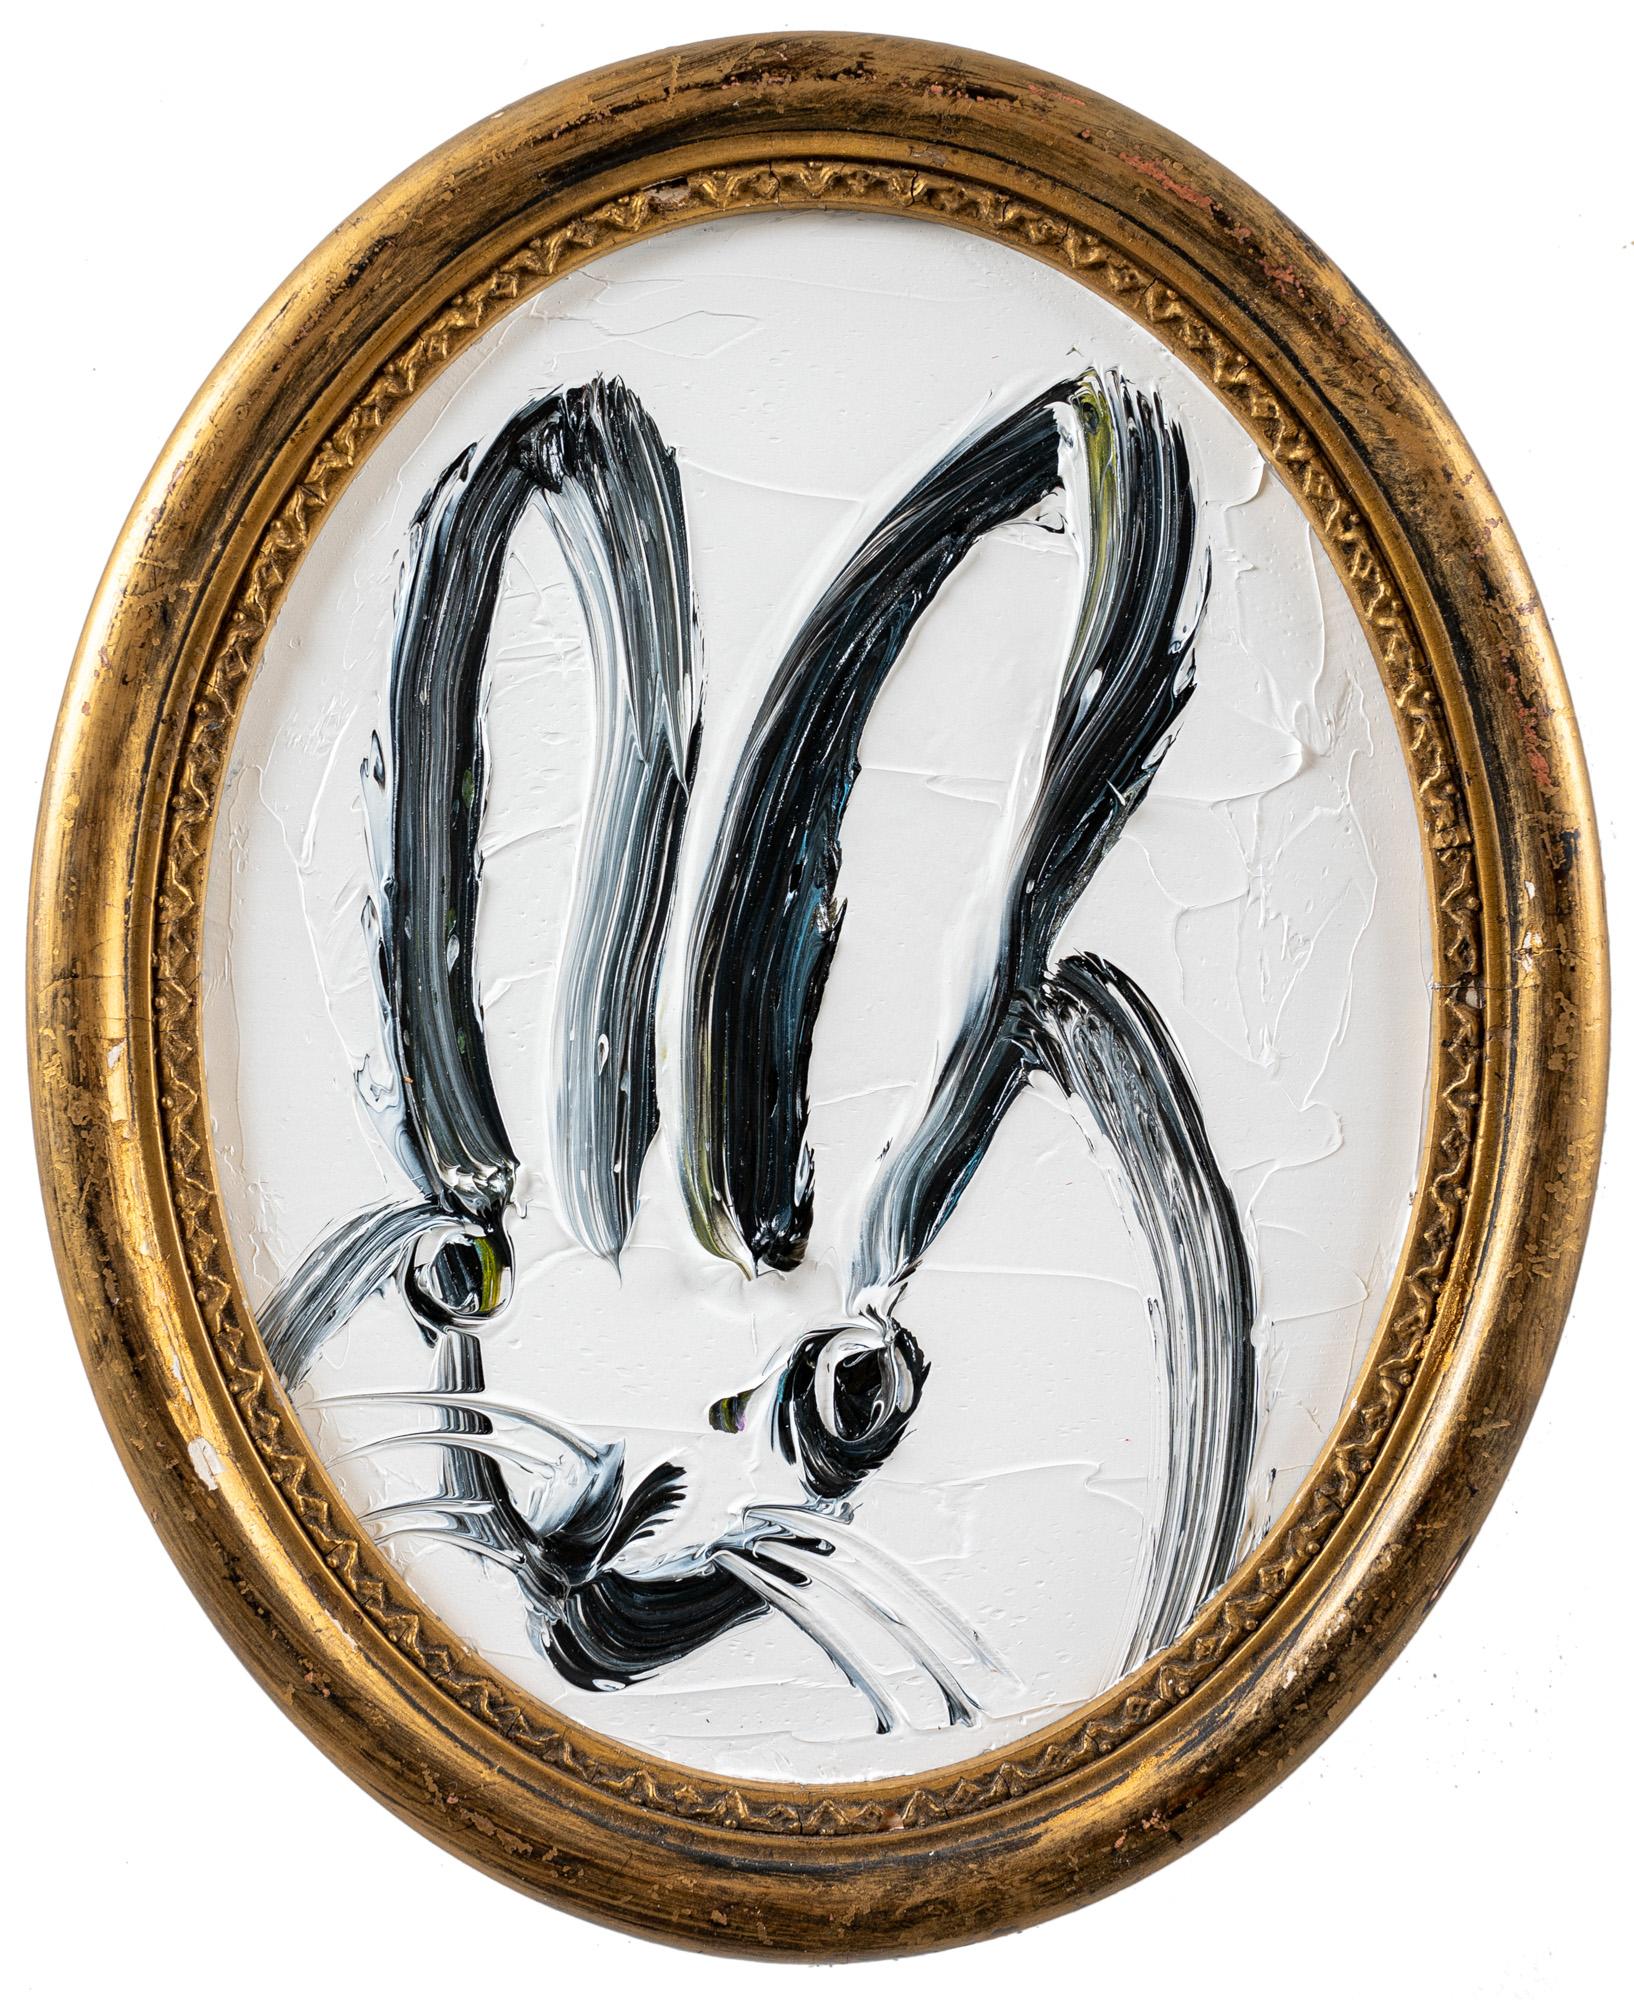 "Max" is a framed oil painting on wood by Hunt Slonem, depicting a lone rabbit in painterly contour lines set against a simple white background. 

This piece is finished in an antique frame, which has been hand-selected by the artist for this